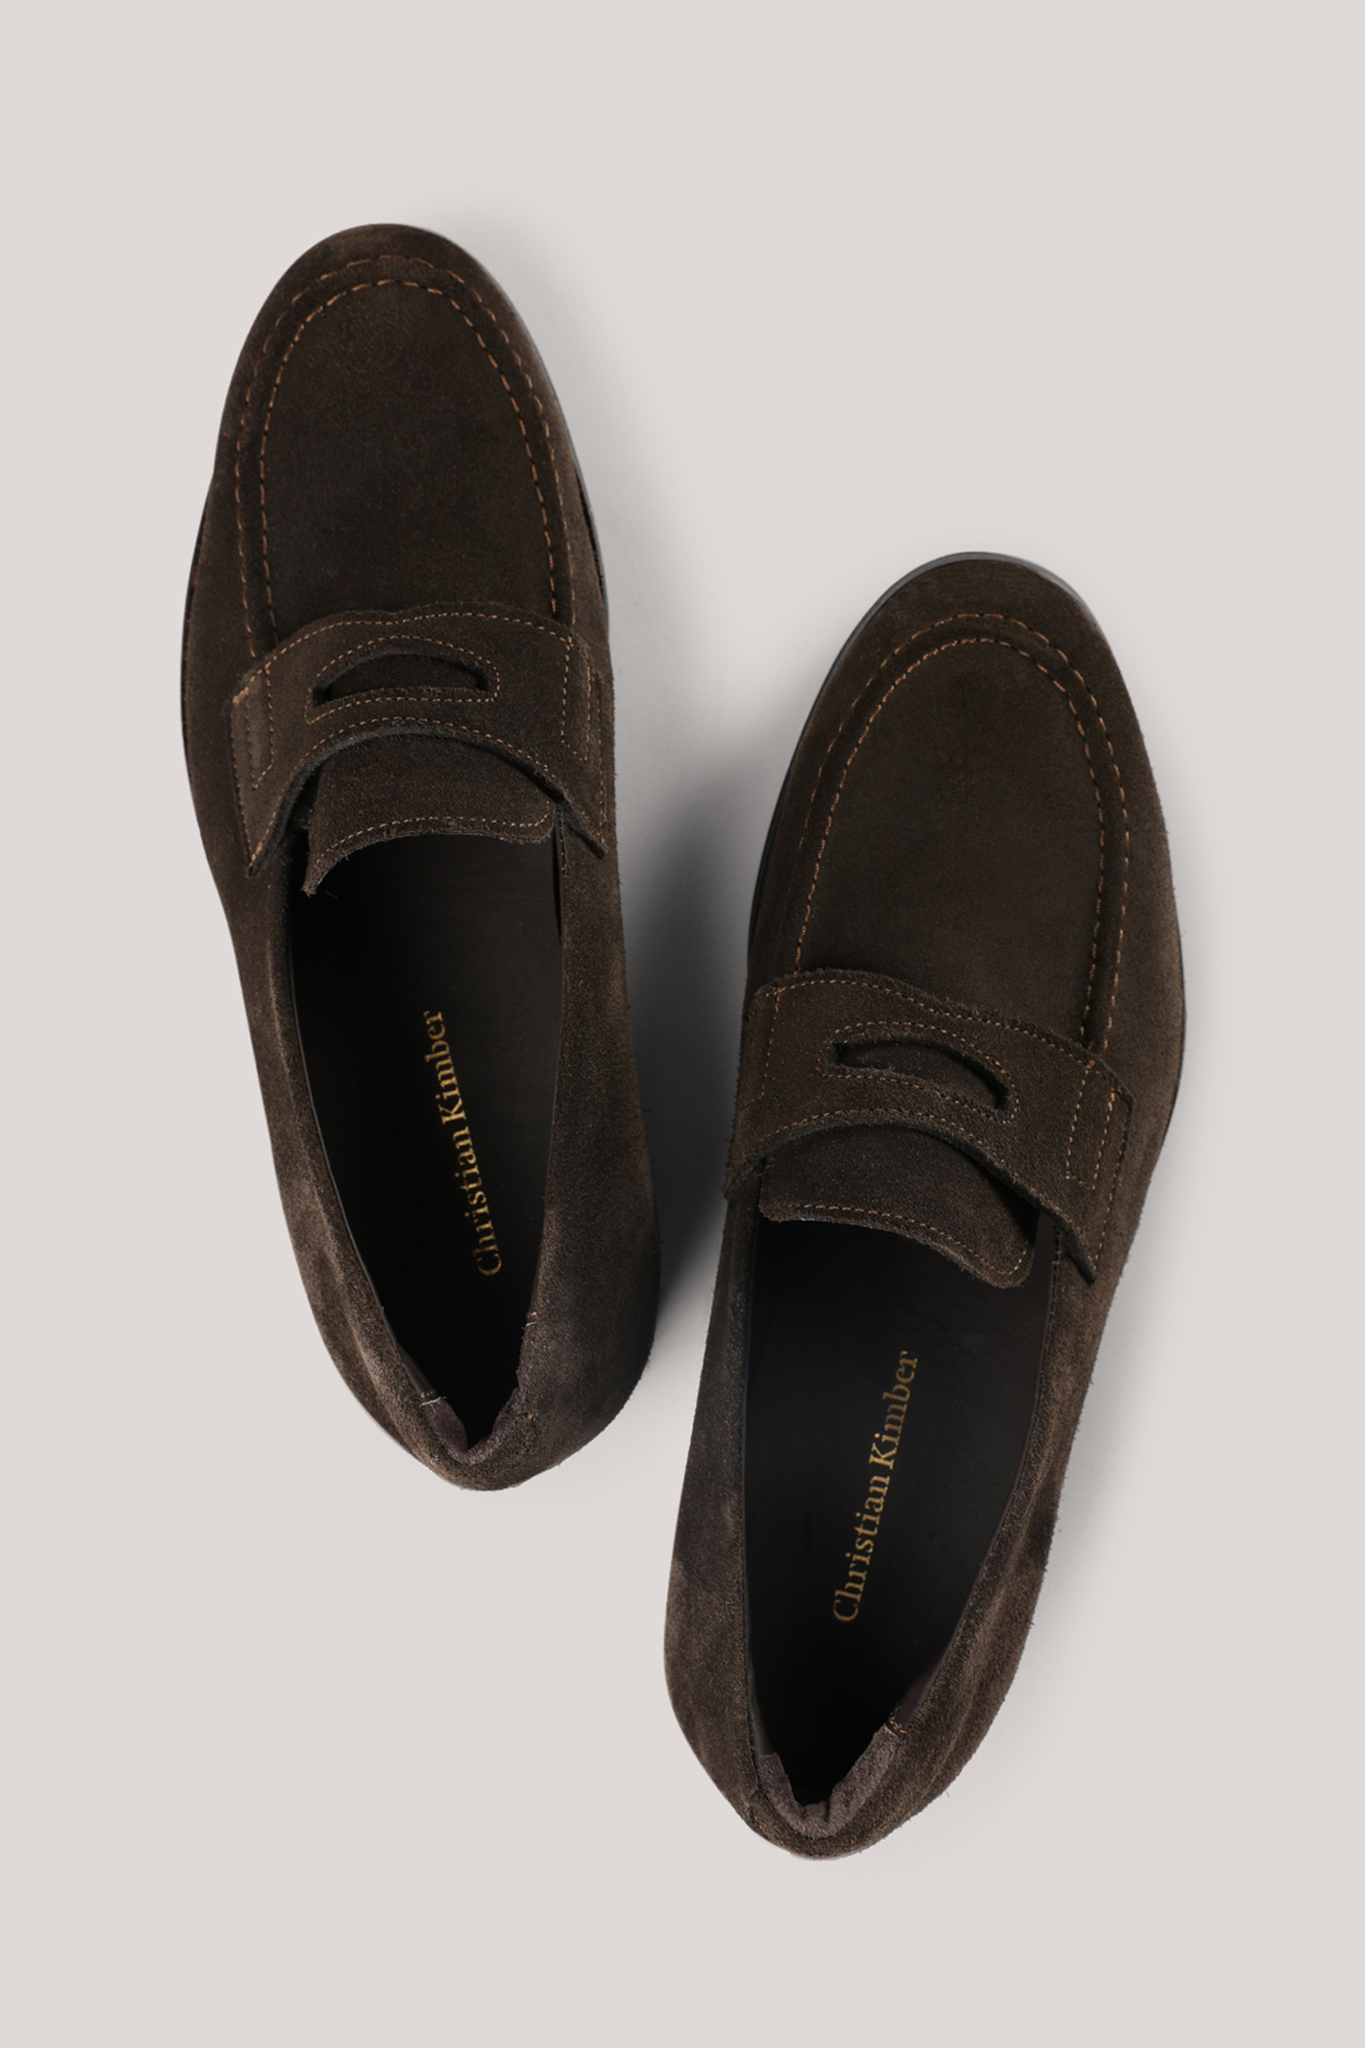 Russell Classic Loafer - Dark Chocolate Suede